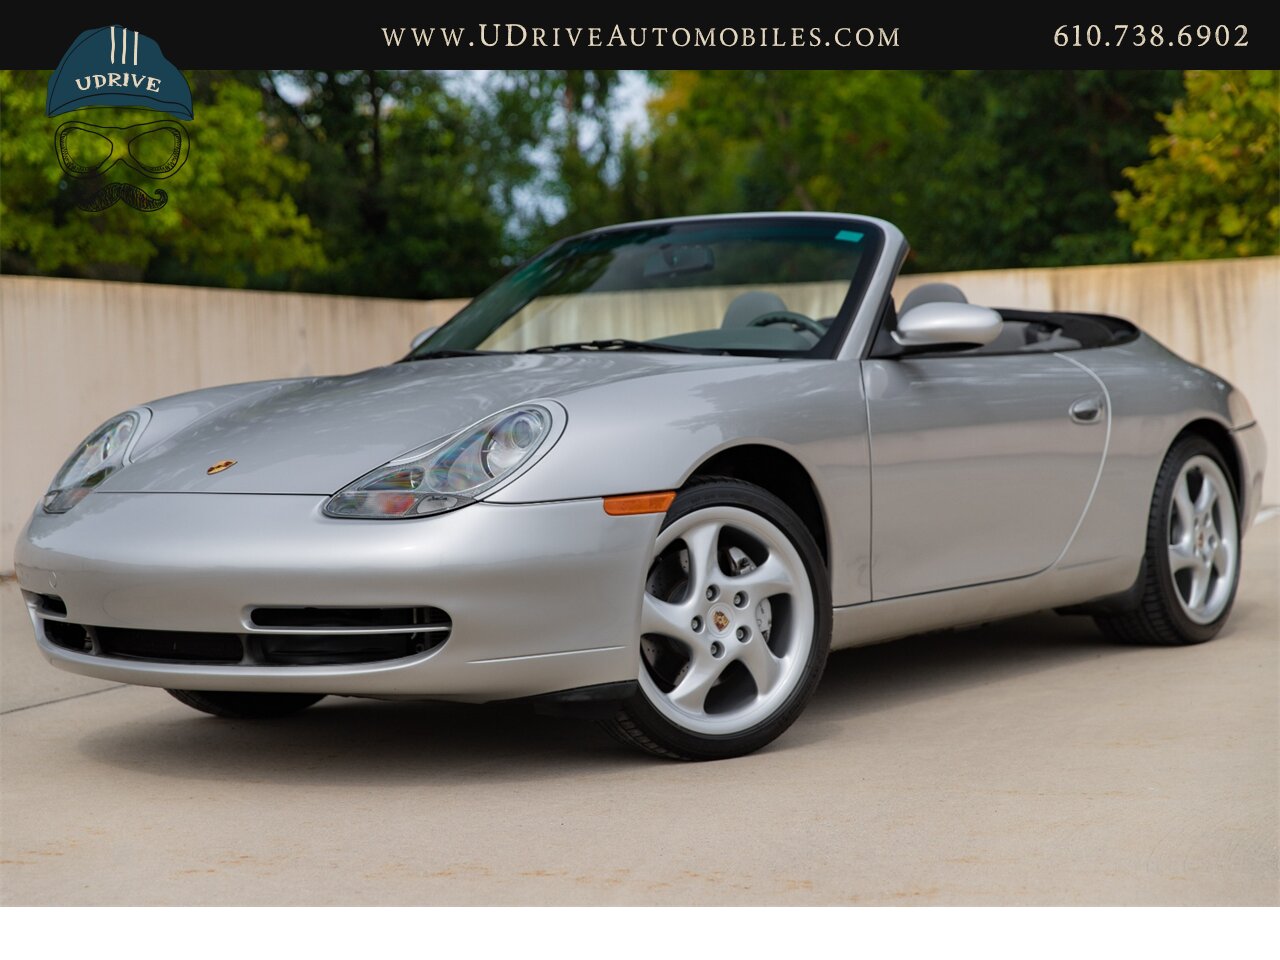 2001 Porsche 911 Carrera 4 Cabriolet Tiptronic IMS Upgrade  Power Seats 18in Turbo Look Wheels 2 Owners $5k Recent Service - Photo 1 - West Chester, PA 19382